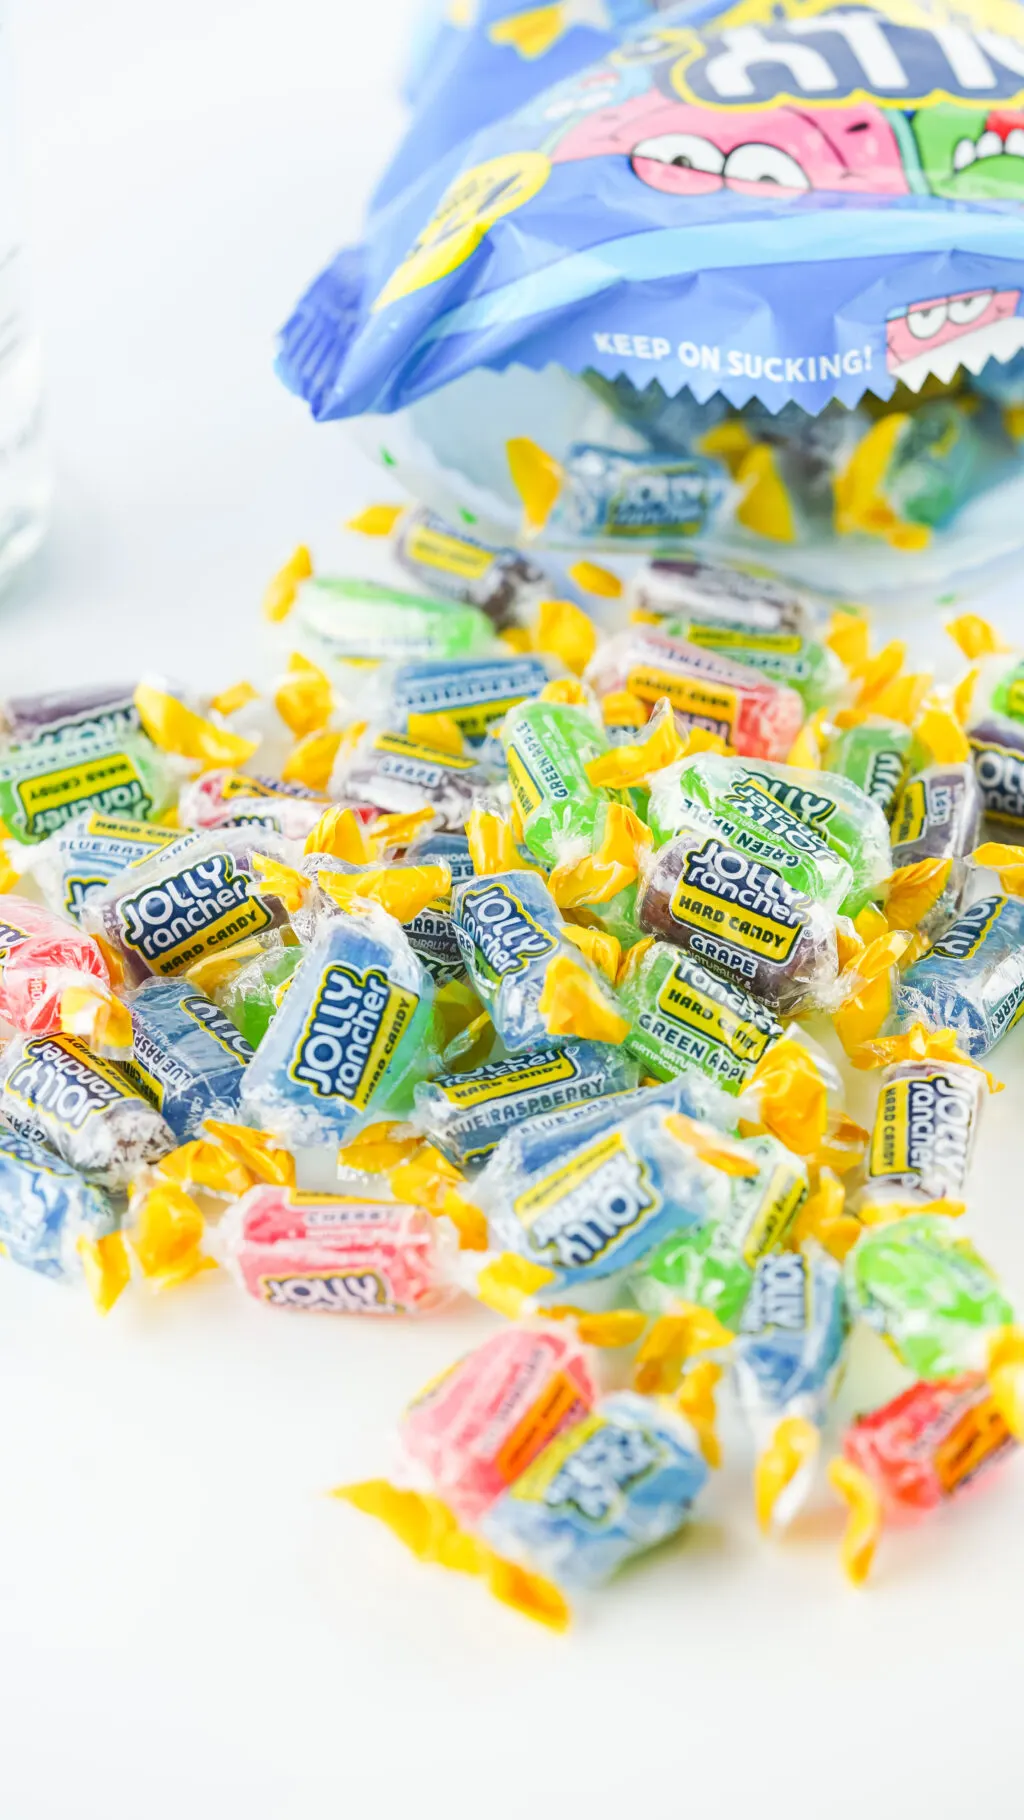 jolly ranchers dumped on table